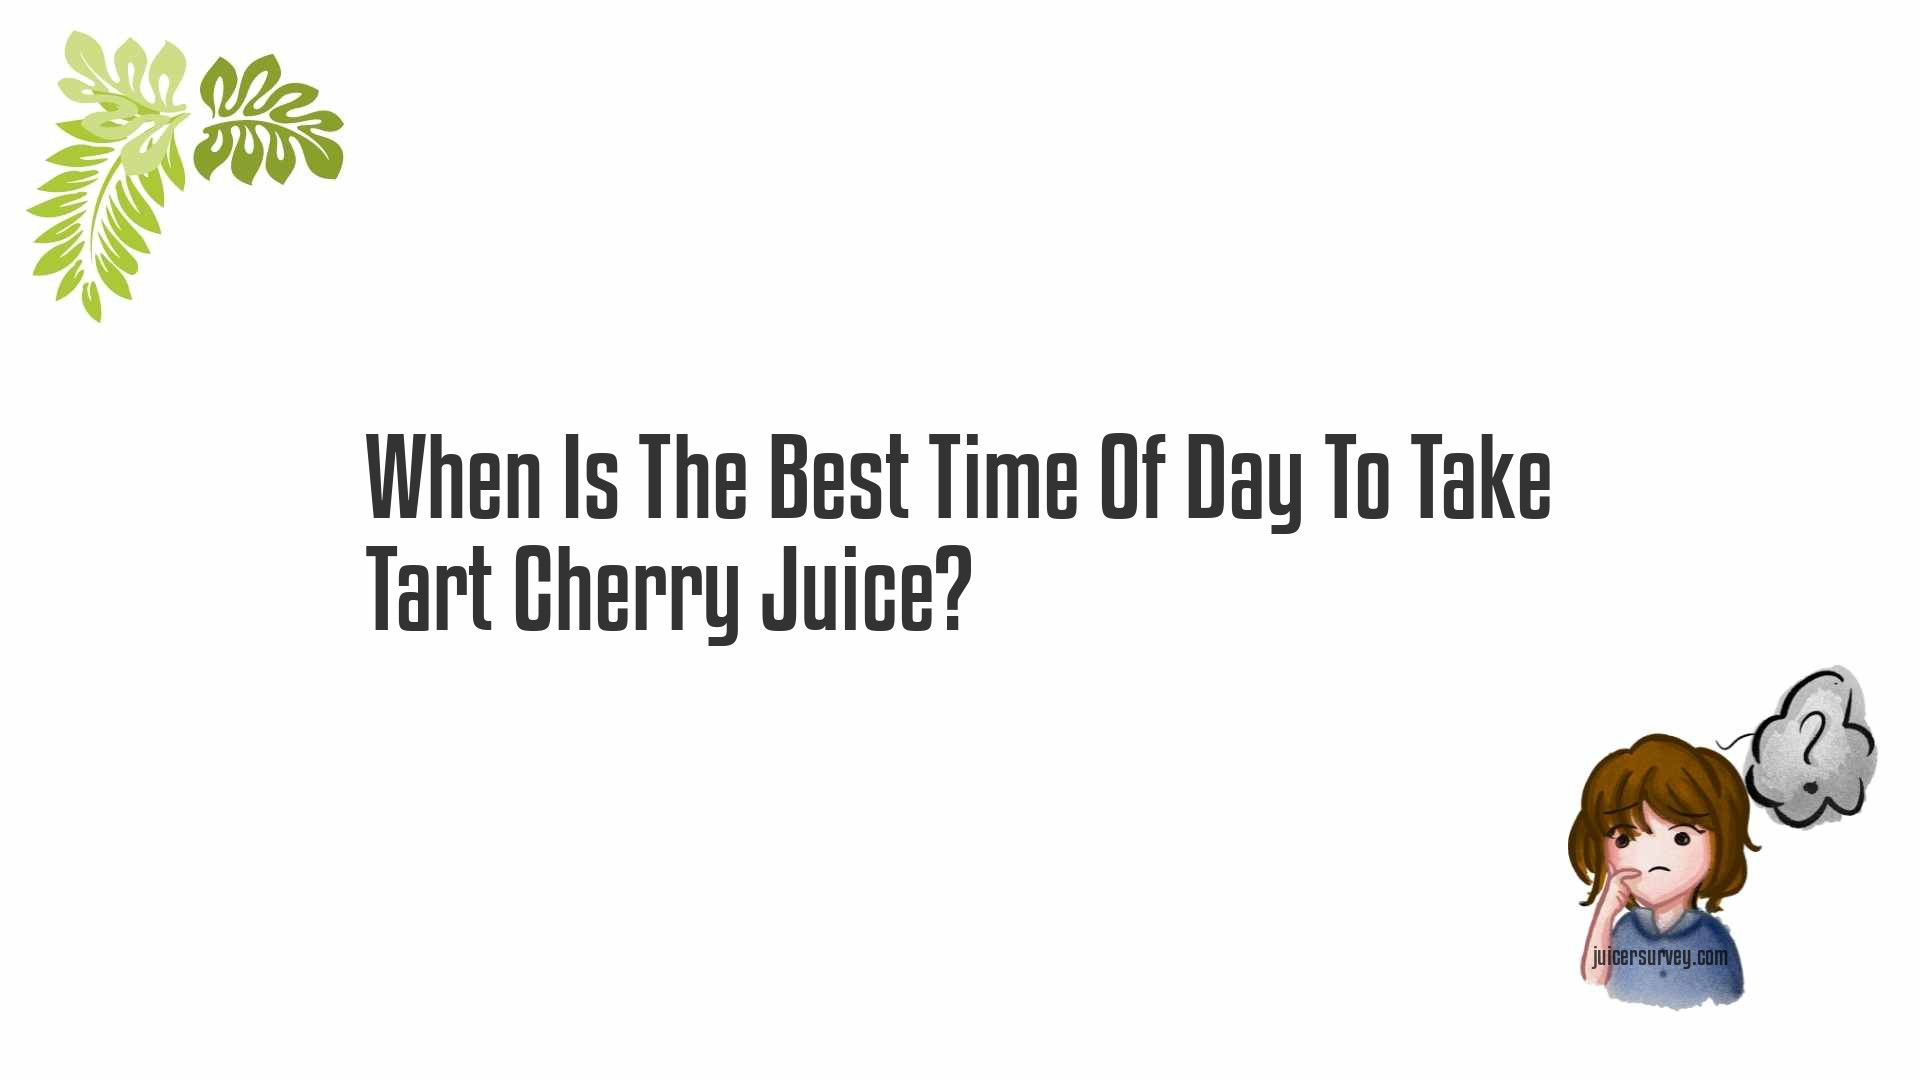 When Is The Best Time Of Day To Take Tart Cherry Juice?